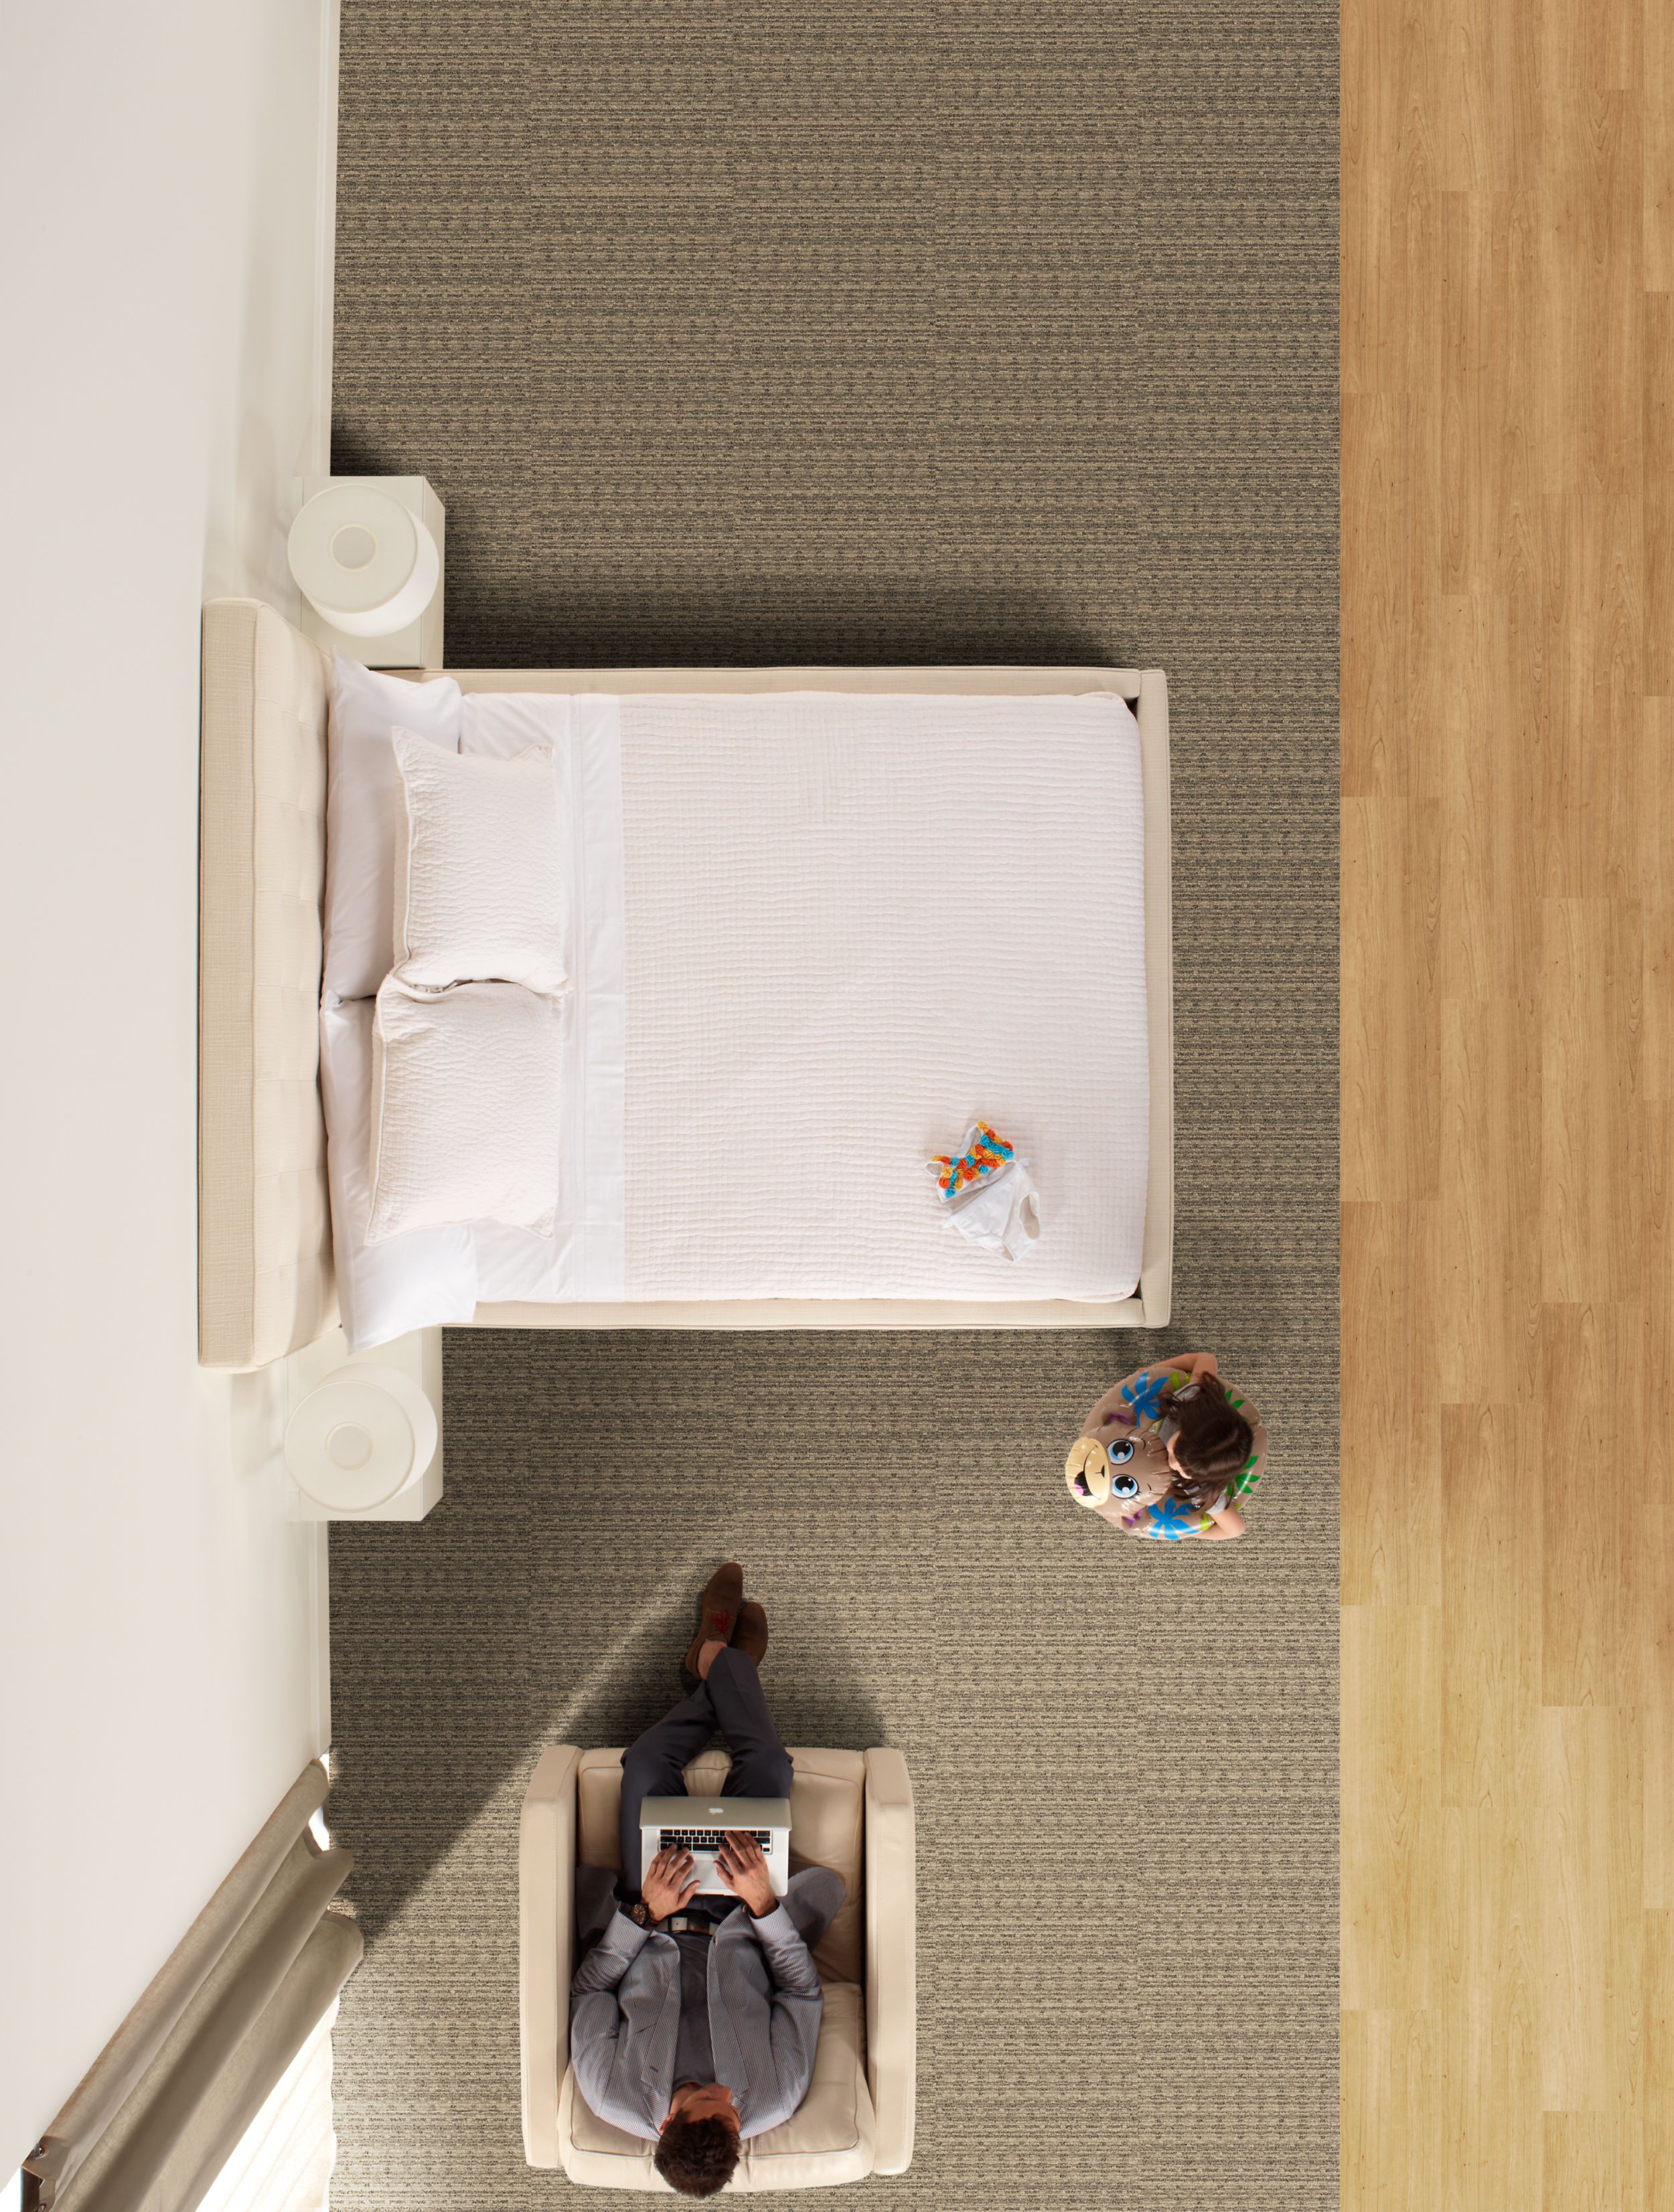 Interface RMS 102 carpet tile and Natural Woodgrains LVT in hotel guest room imagen número 1